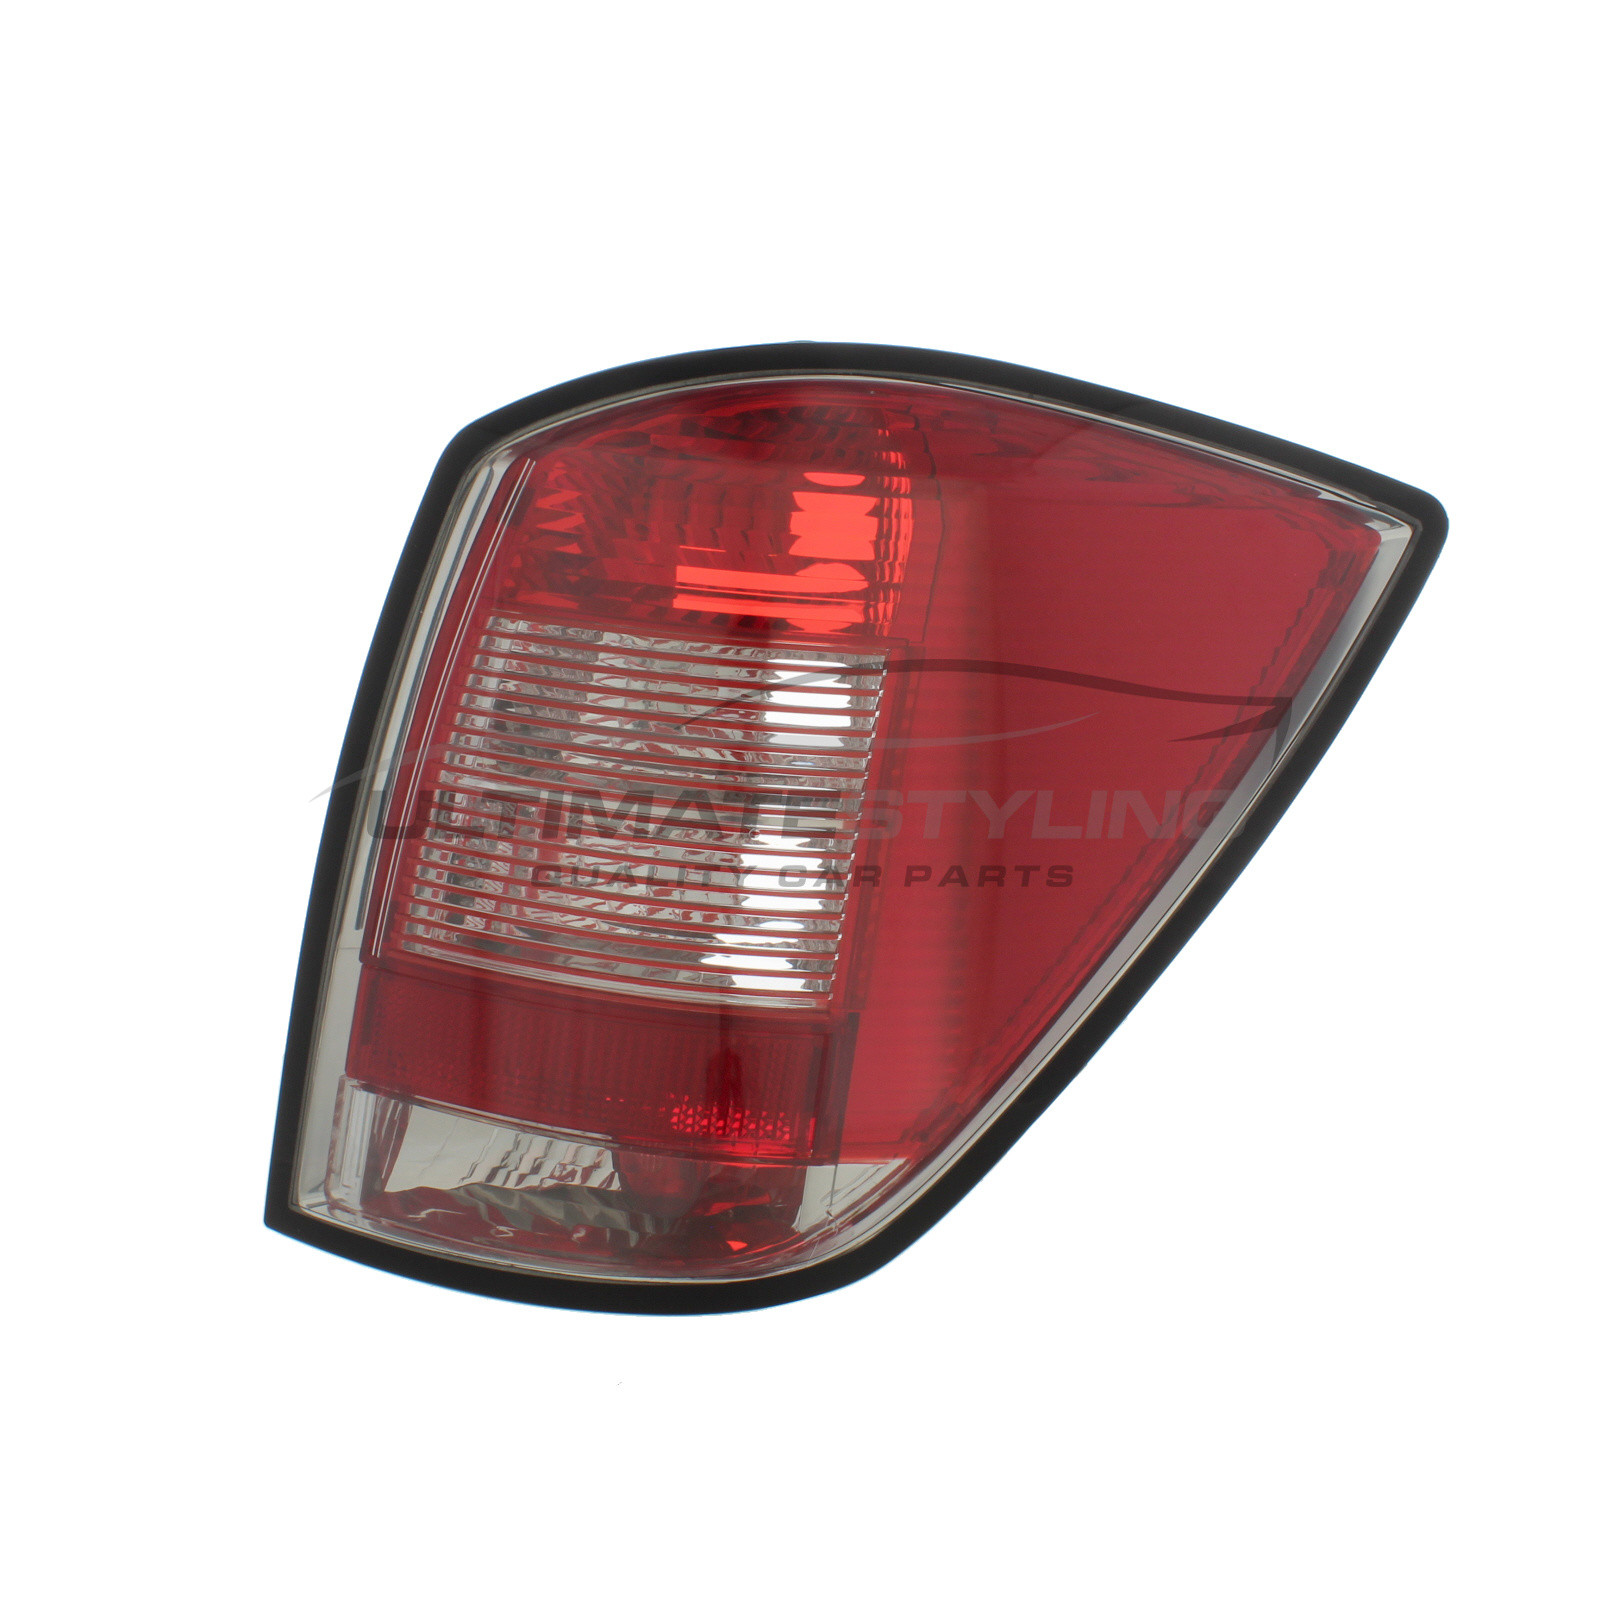 Vauxhall Astra 2007-2013 Non-LED with Clear Indicator Rear Light / Tail Light Excluding Bulb Holder Drivers Side (RH)